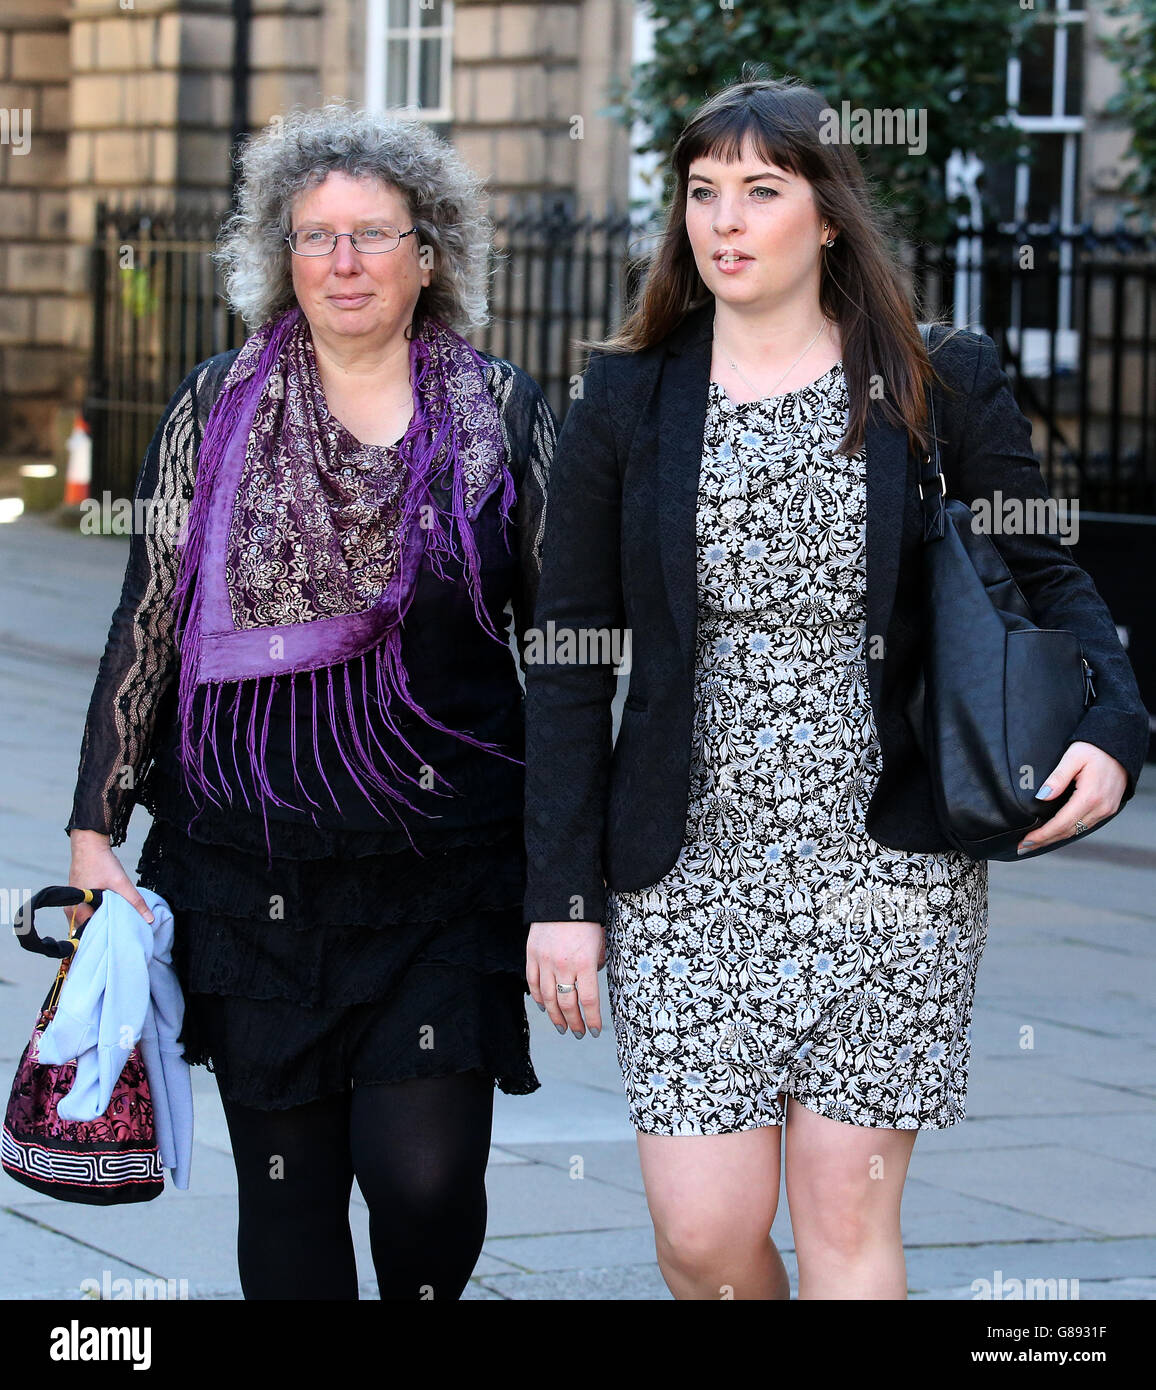 Euphemia Matheson (right) and Fiona Grahame, two of Liberal Democrat MP Alistair Carmichael's Orkney and Shetland constituents, who lodged a petition to oust him, arrive for the Election Court trial of the MP at the Court of Session in Edinburgh, as a legal challenge to his election begins today and will be broadcast live in what is believed to be a television first for a court hearing in Scotland. Stock Photo